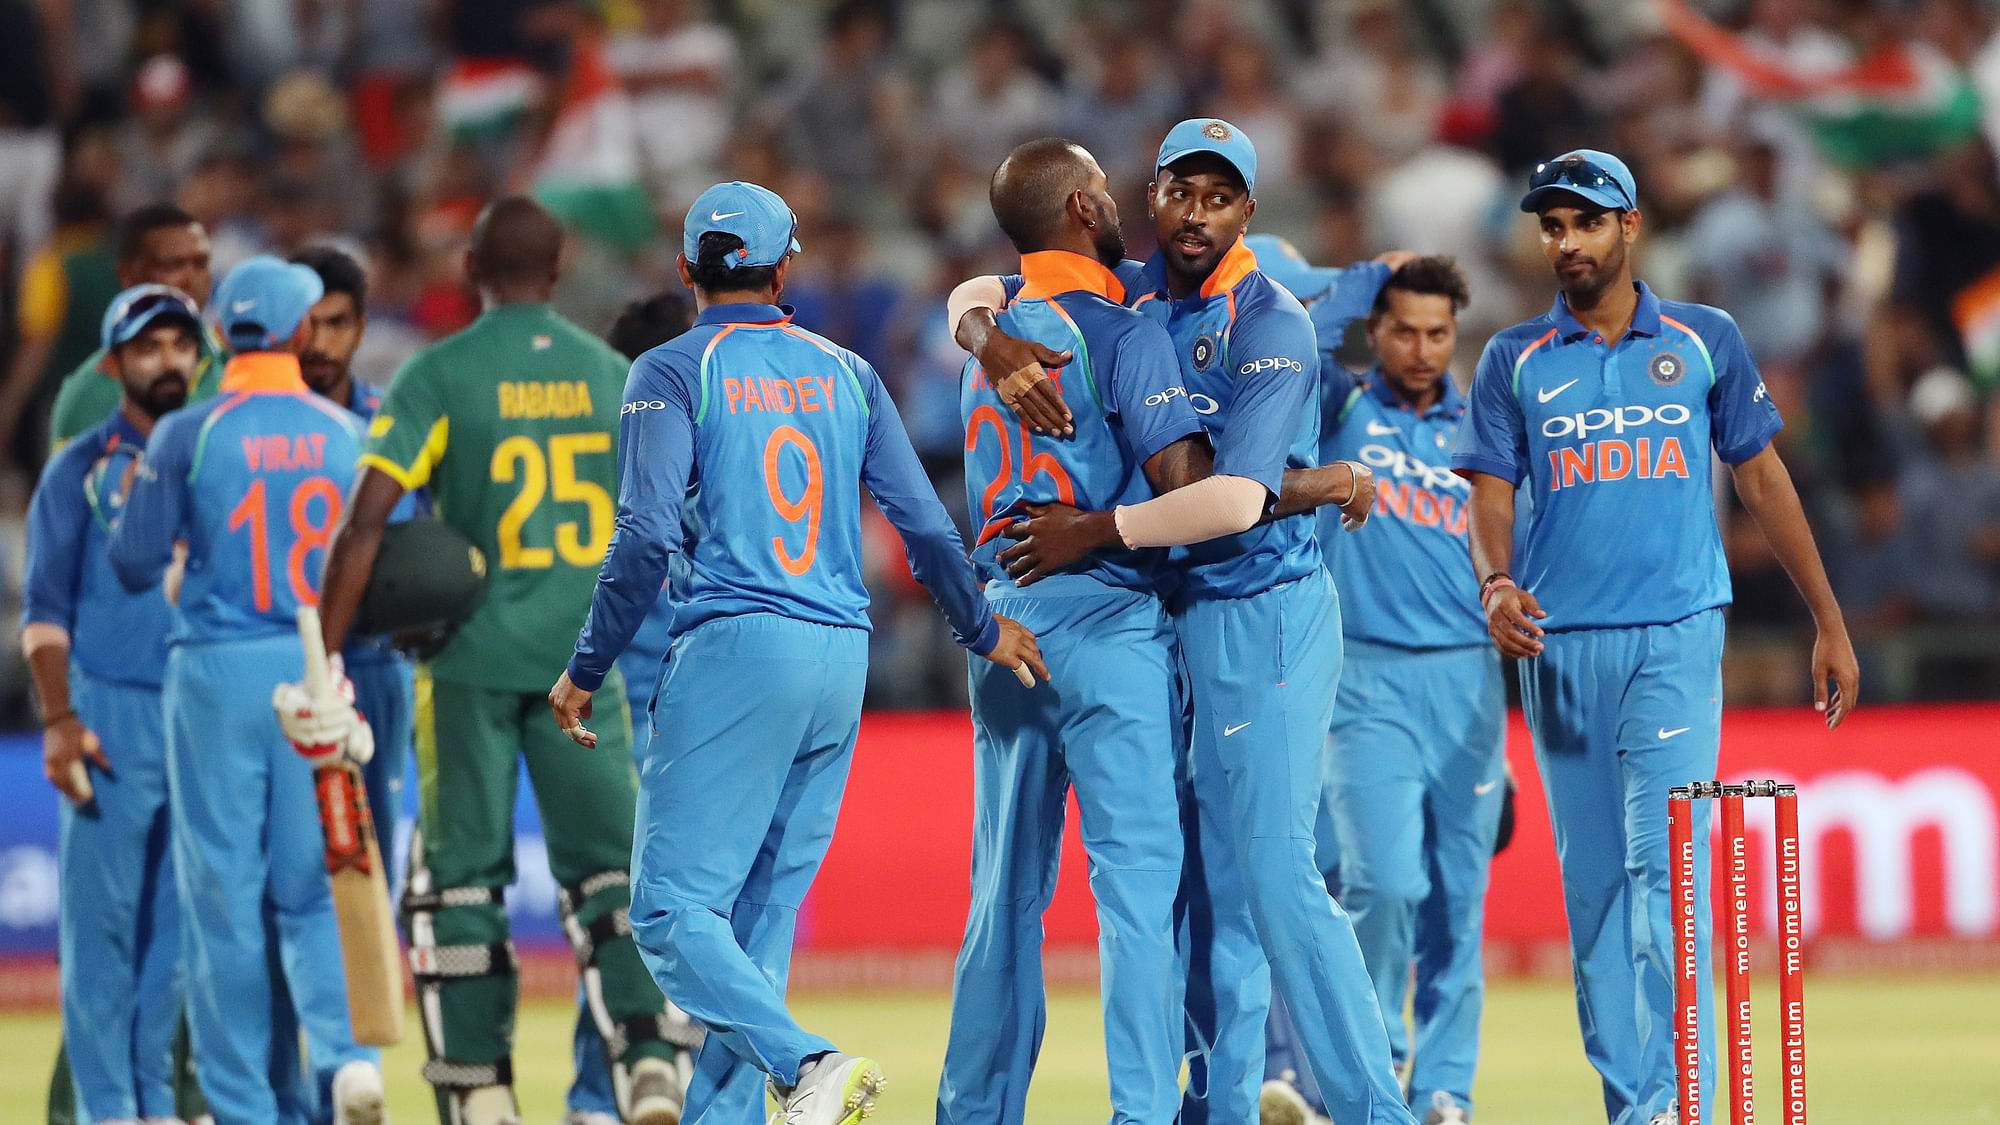 India celebrate the win during the 3rd One Day International match between South Africa and India held at the Newlands Cricket Ground in Cape Town, South Africa on the 7th February 2018